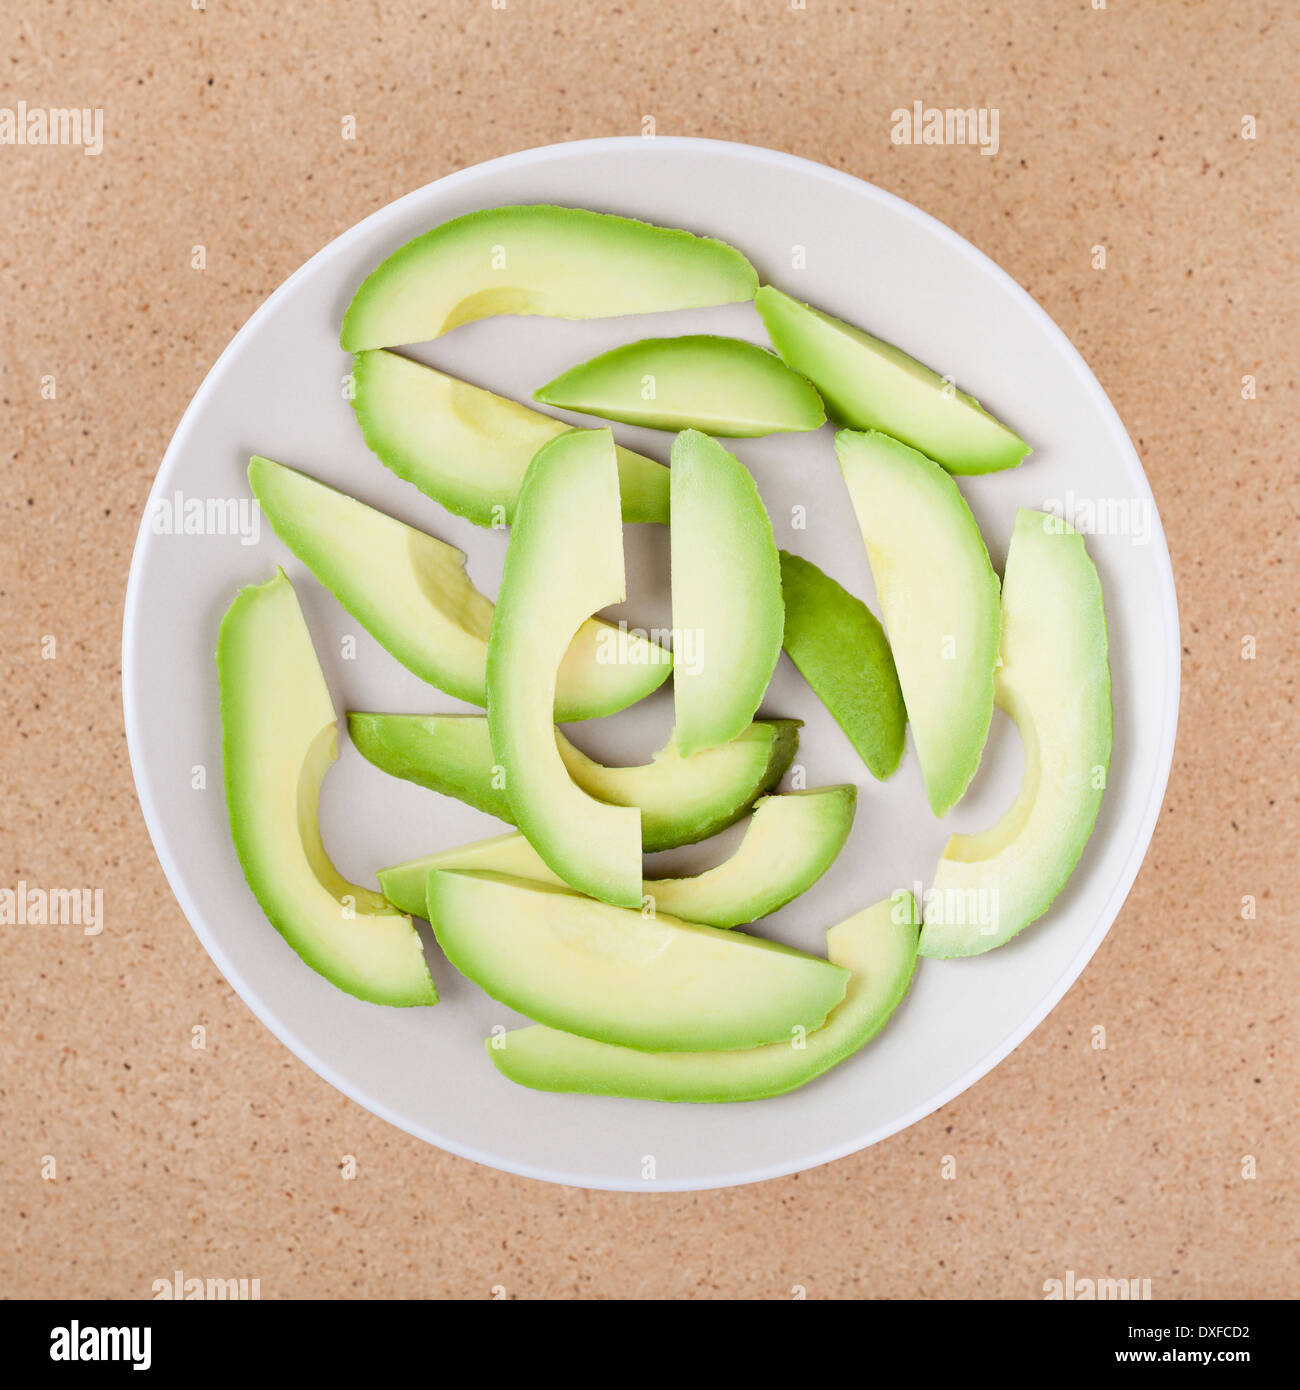 Fresh sliced avocado on plate, over wooden background. Stock Photo